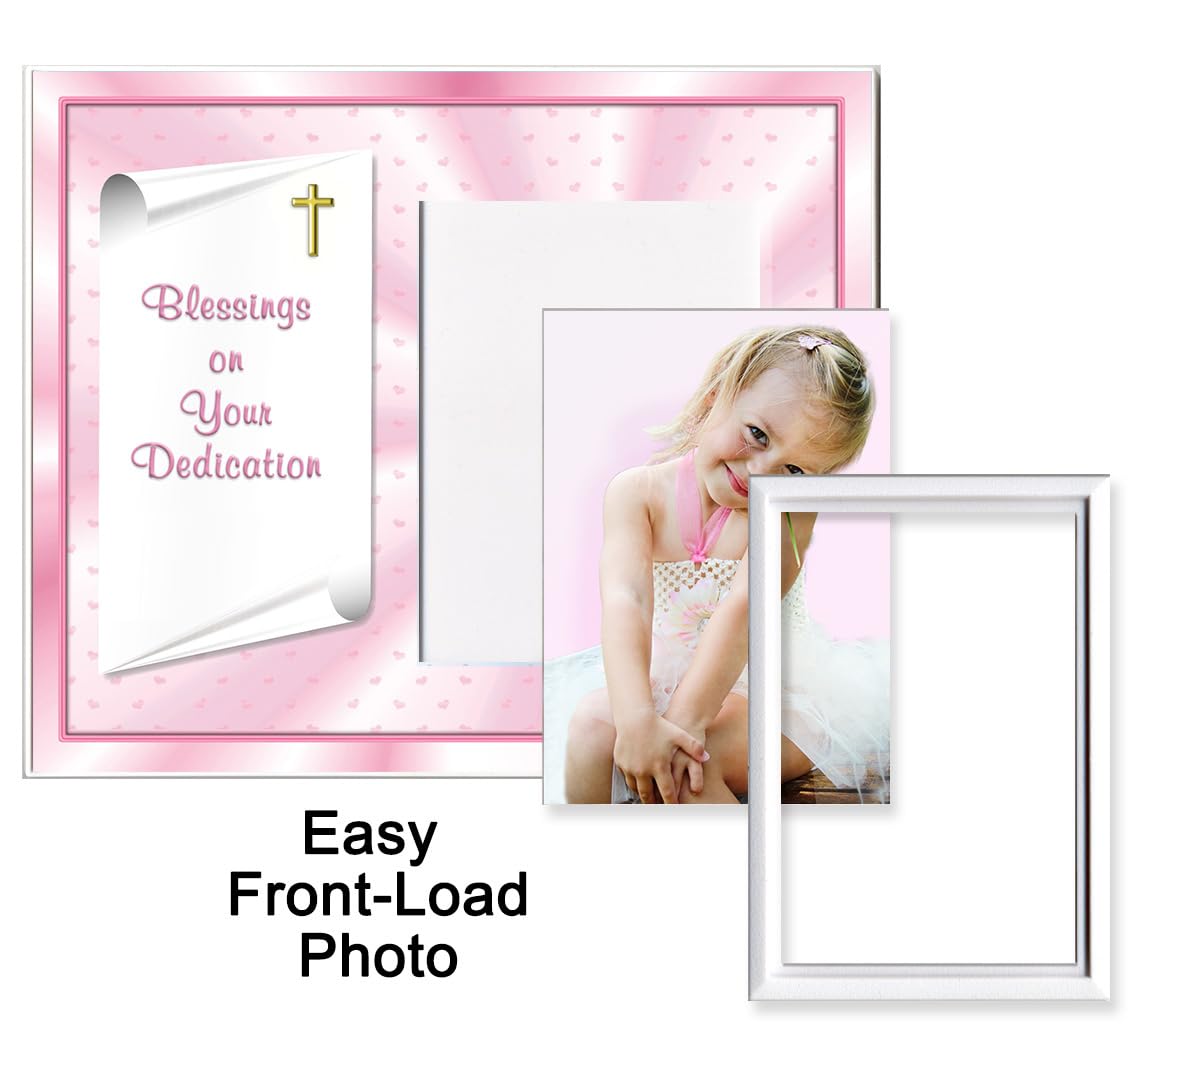 Expressly Yours! Photo Expressions Baby Blessing Dedication Picture Frame Gift Blessings on Your Dedication - Girl